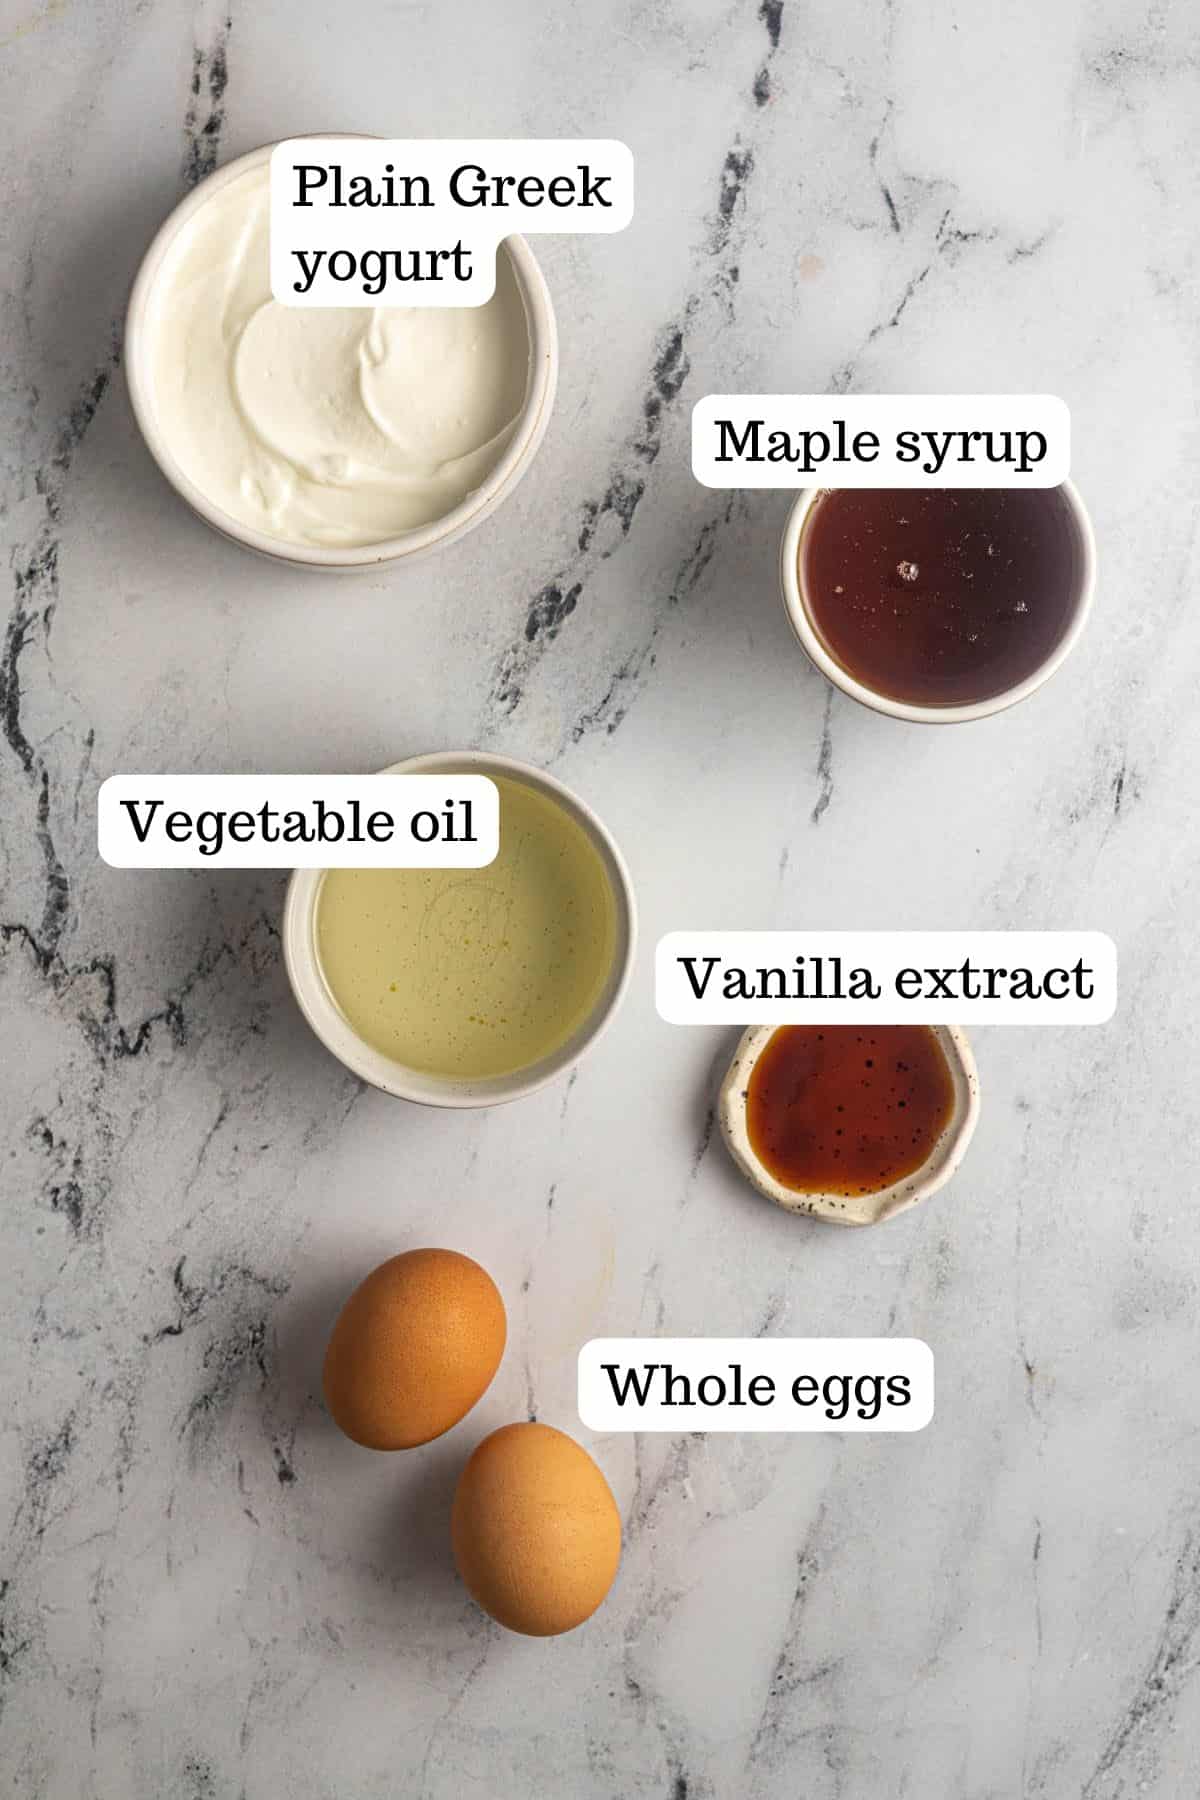 This image shows the wet ingredients for the Gluten Free Raspberry Muffins. In the bowls, you will find Greek yogurt, maple syrup, vegetable oil, vanilla extract, and whole eggs.